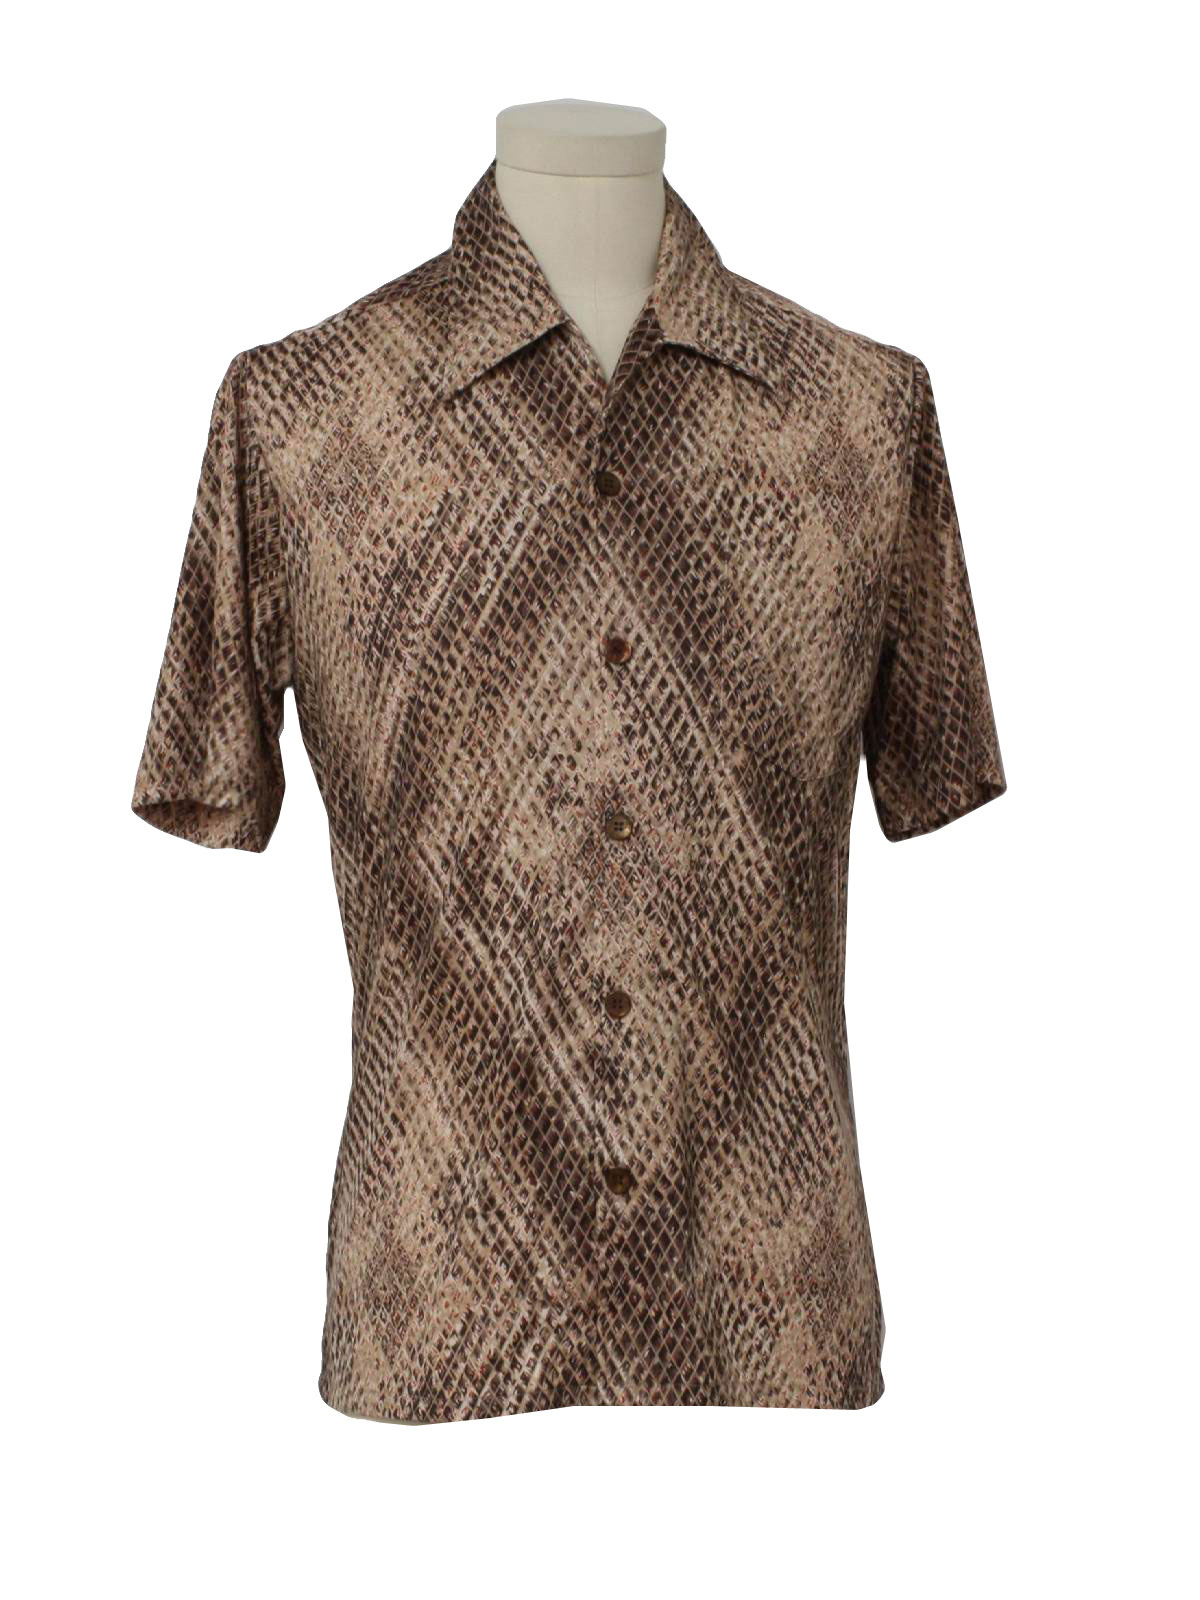 1970's Print Disco Shirt (Spire): 70s -Spire- Mens taupe background ...